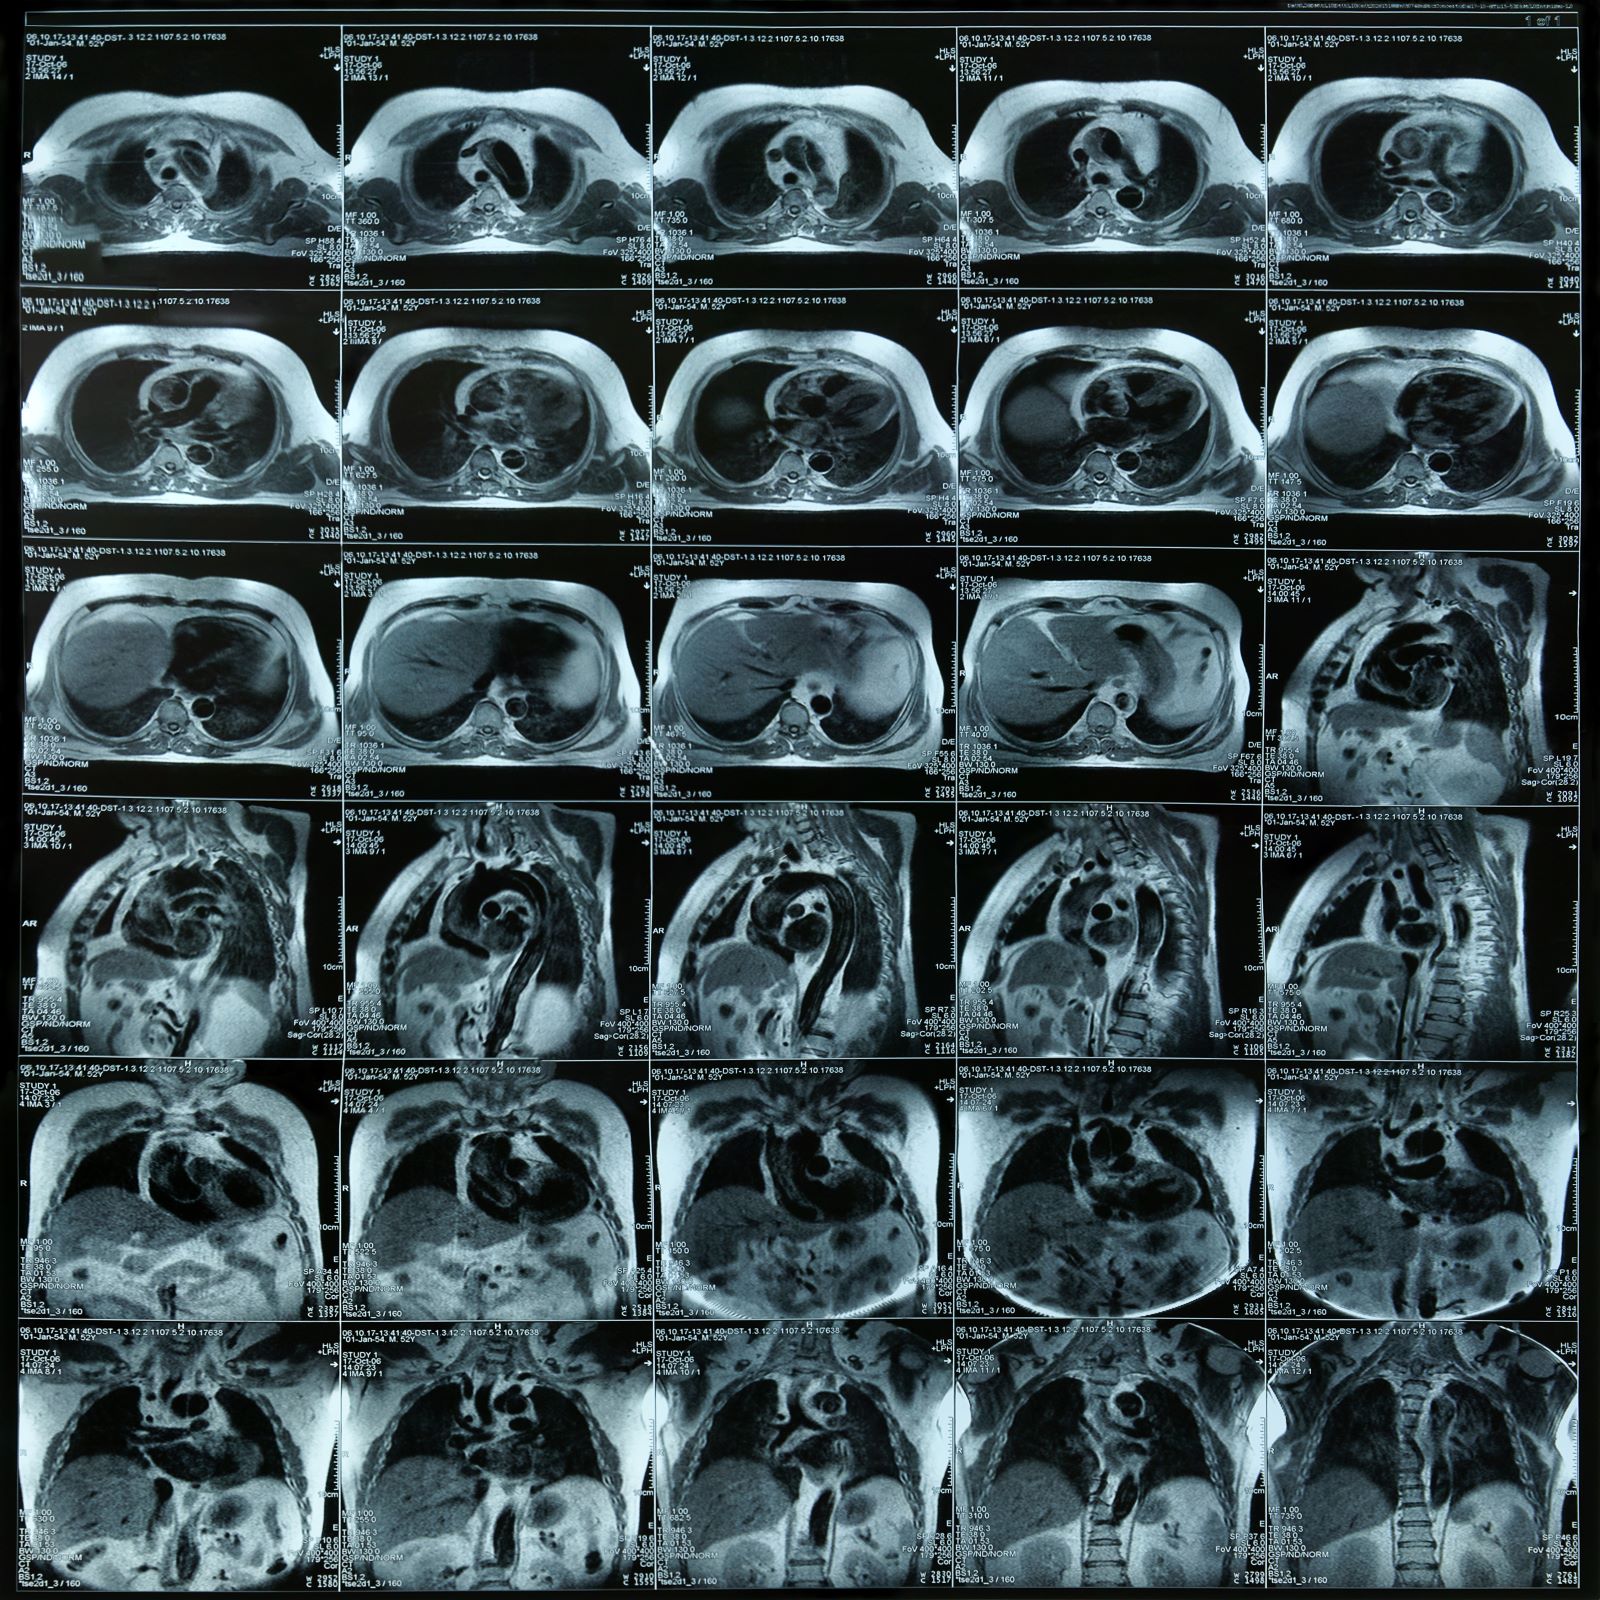 Angioplasty heart exam seen in multiple small black and white images